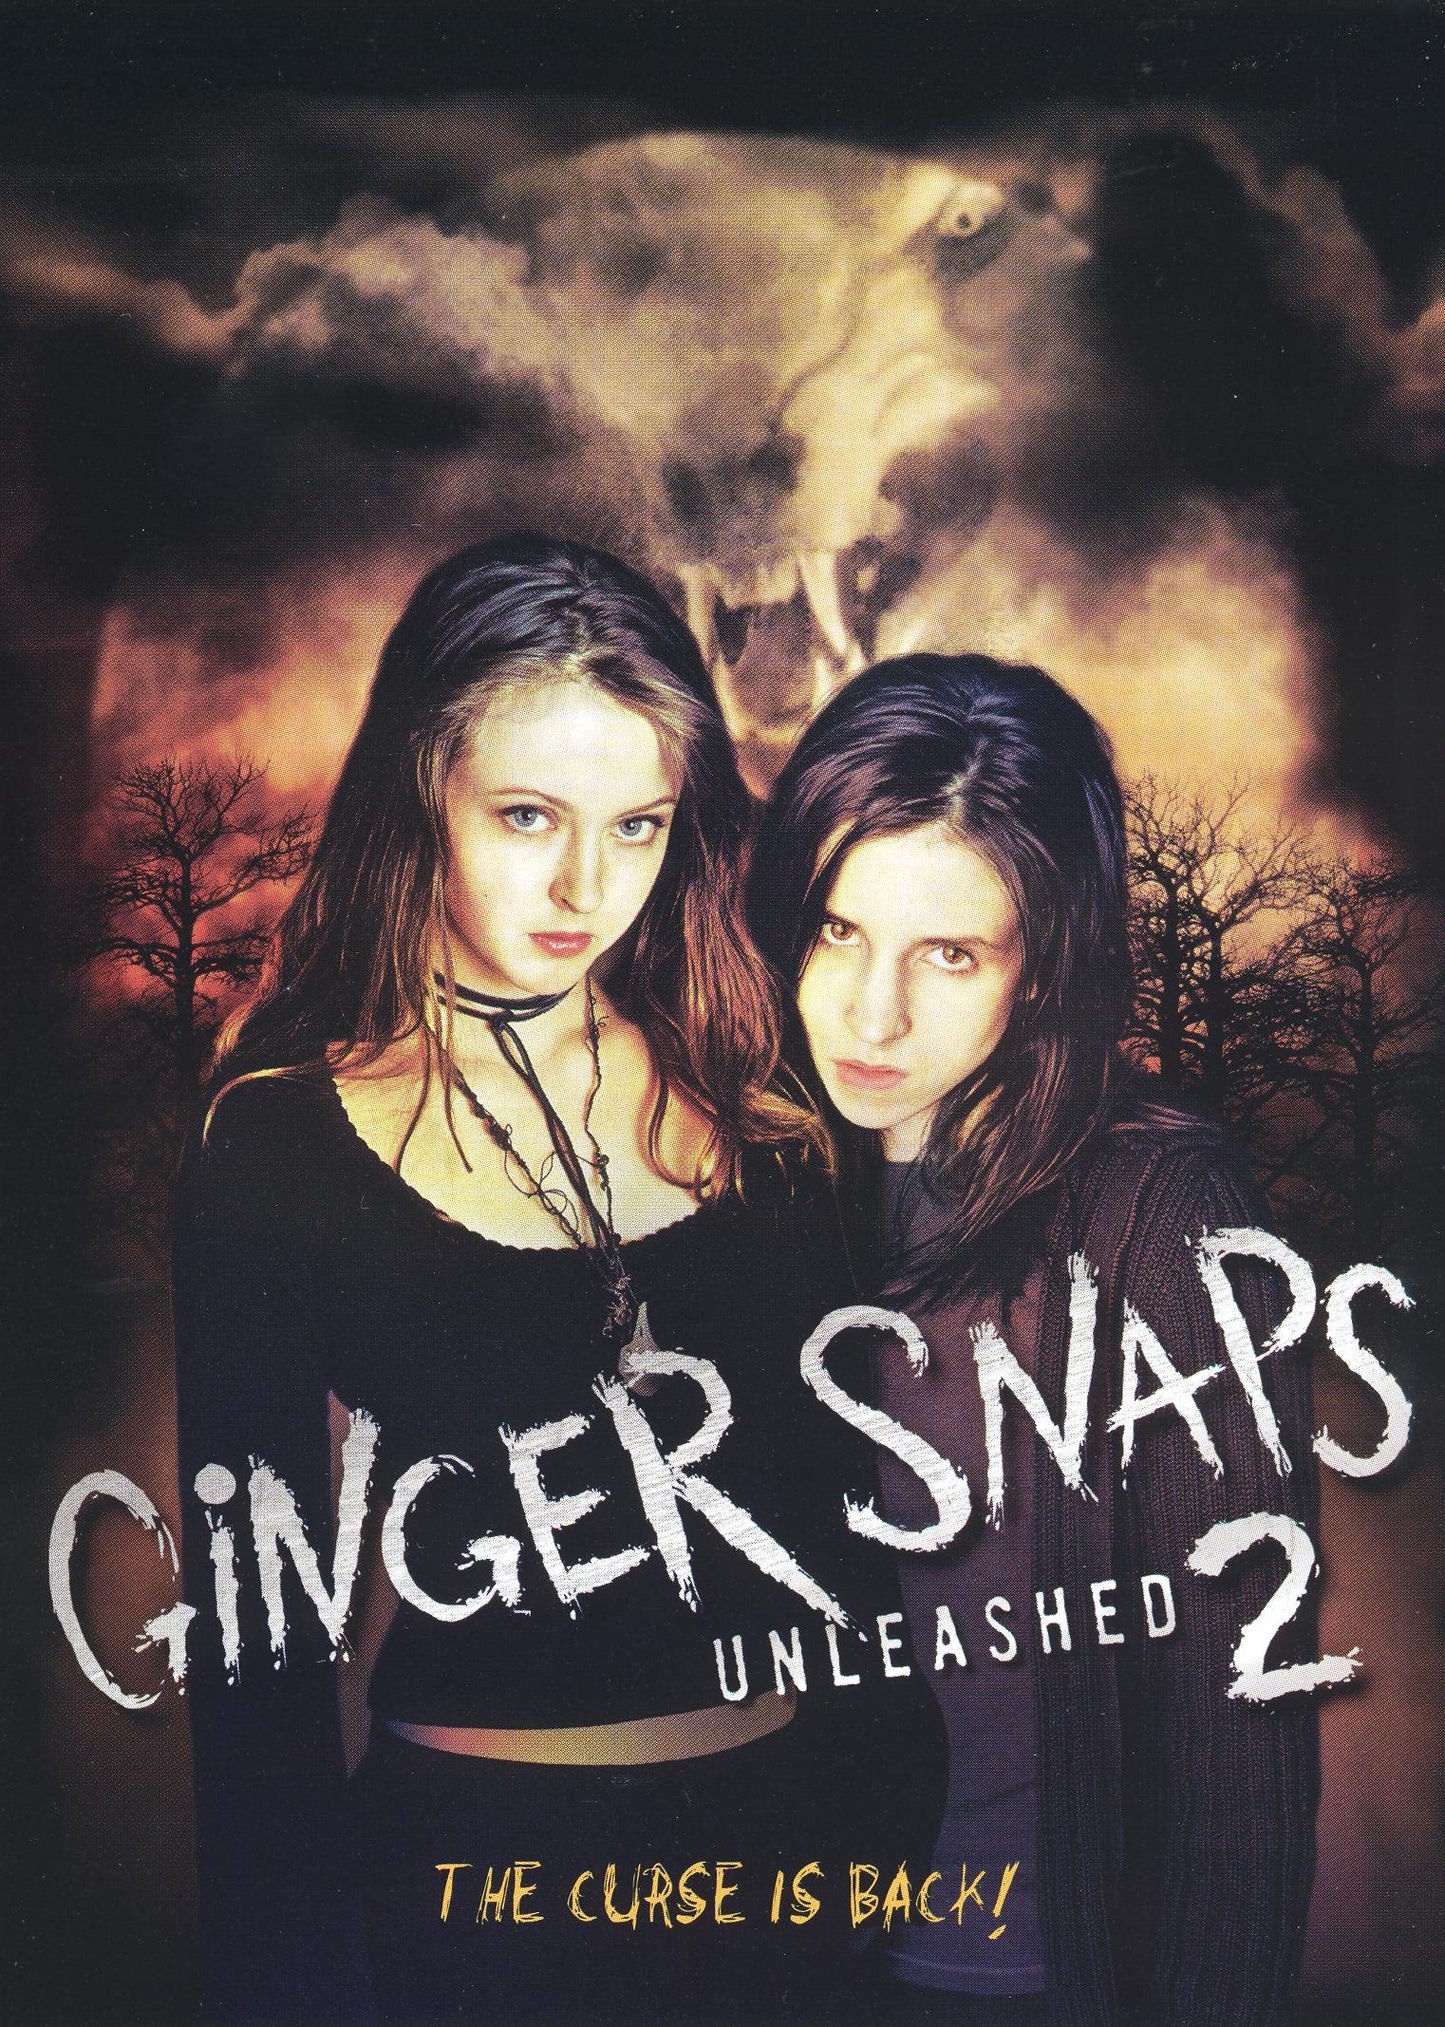 Ginger Snaps 2: Unleashed cover art